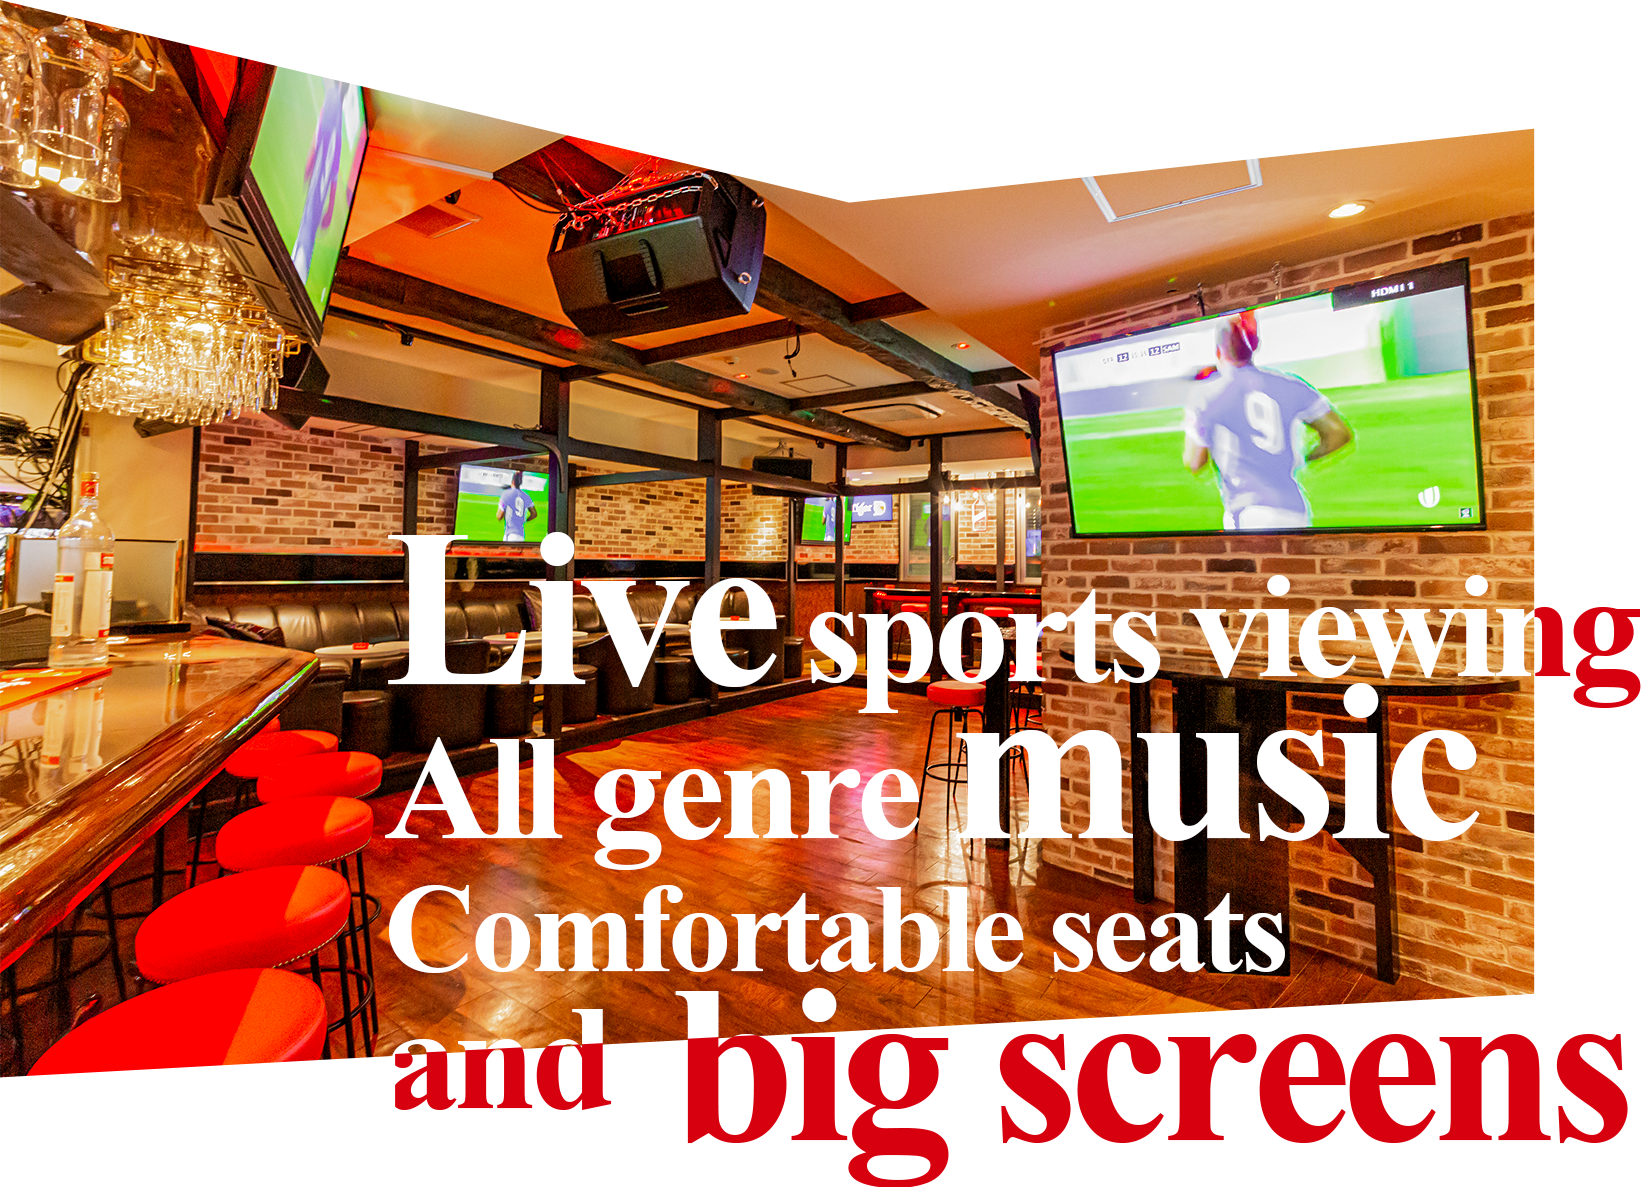 Live sports viewing, All genre music, Comfortable seats, and  big screens